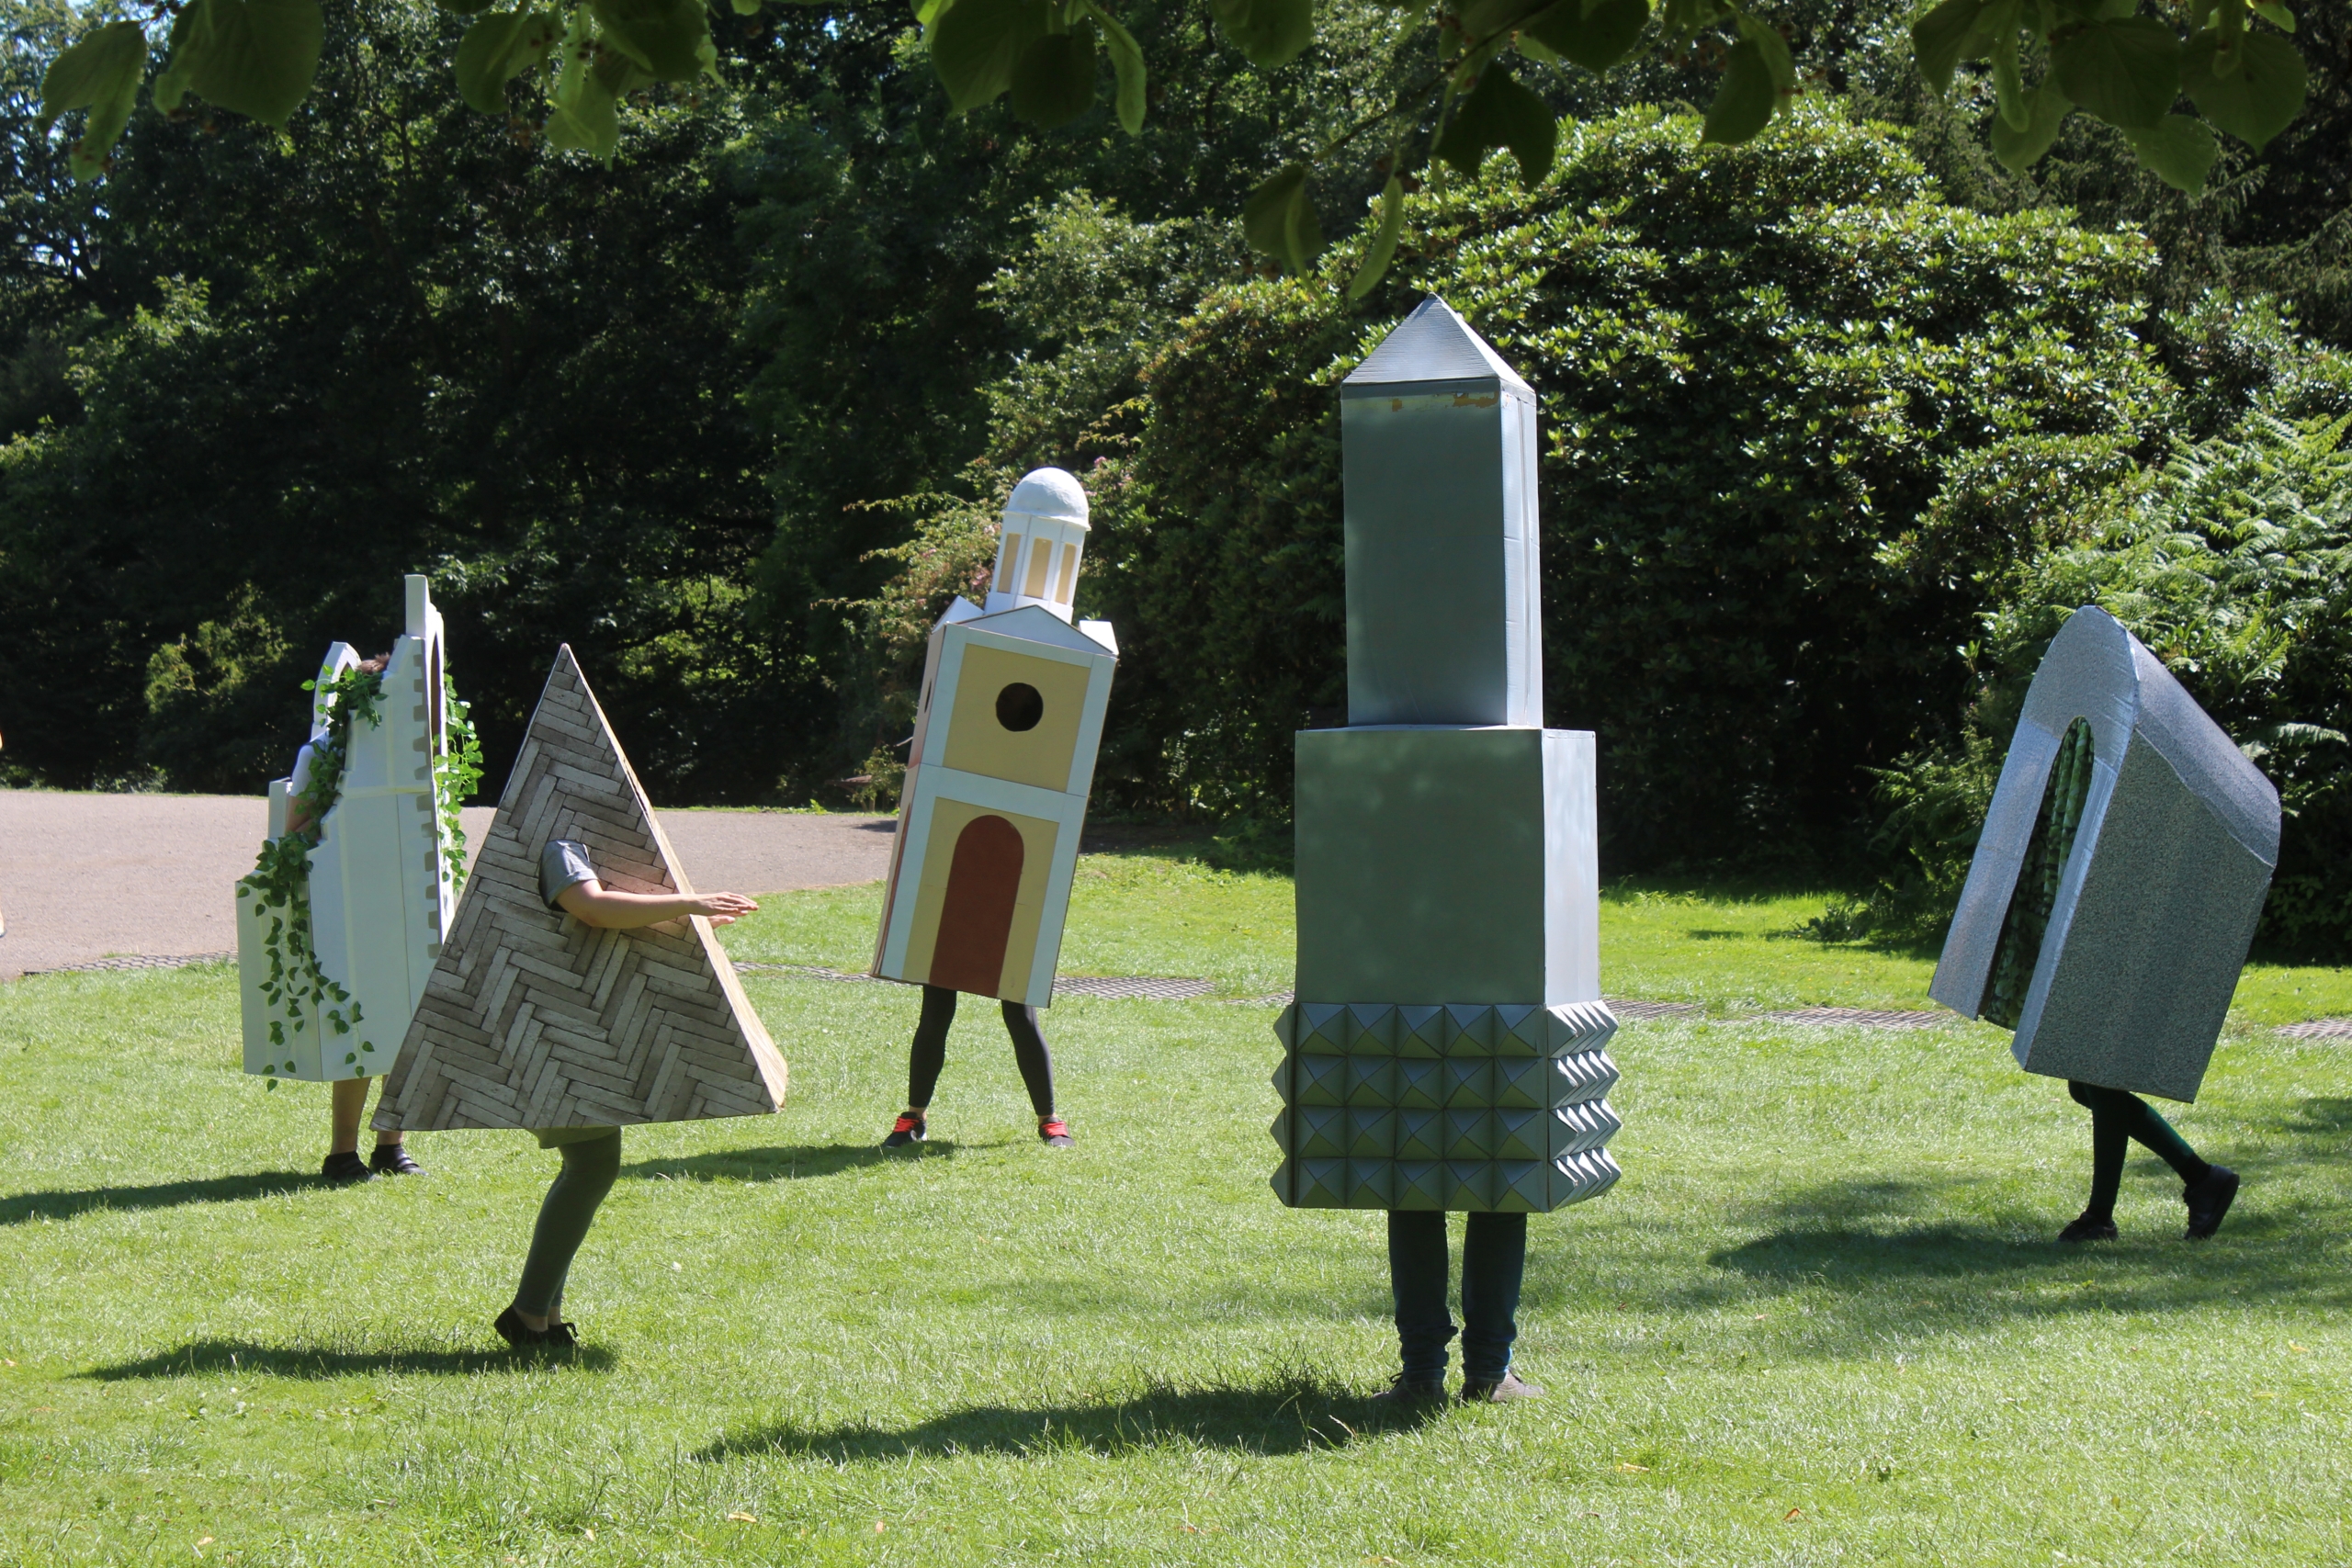 a parade of architectural commas performing in an outdoor park called flatland